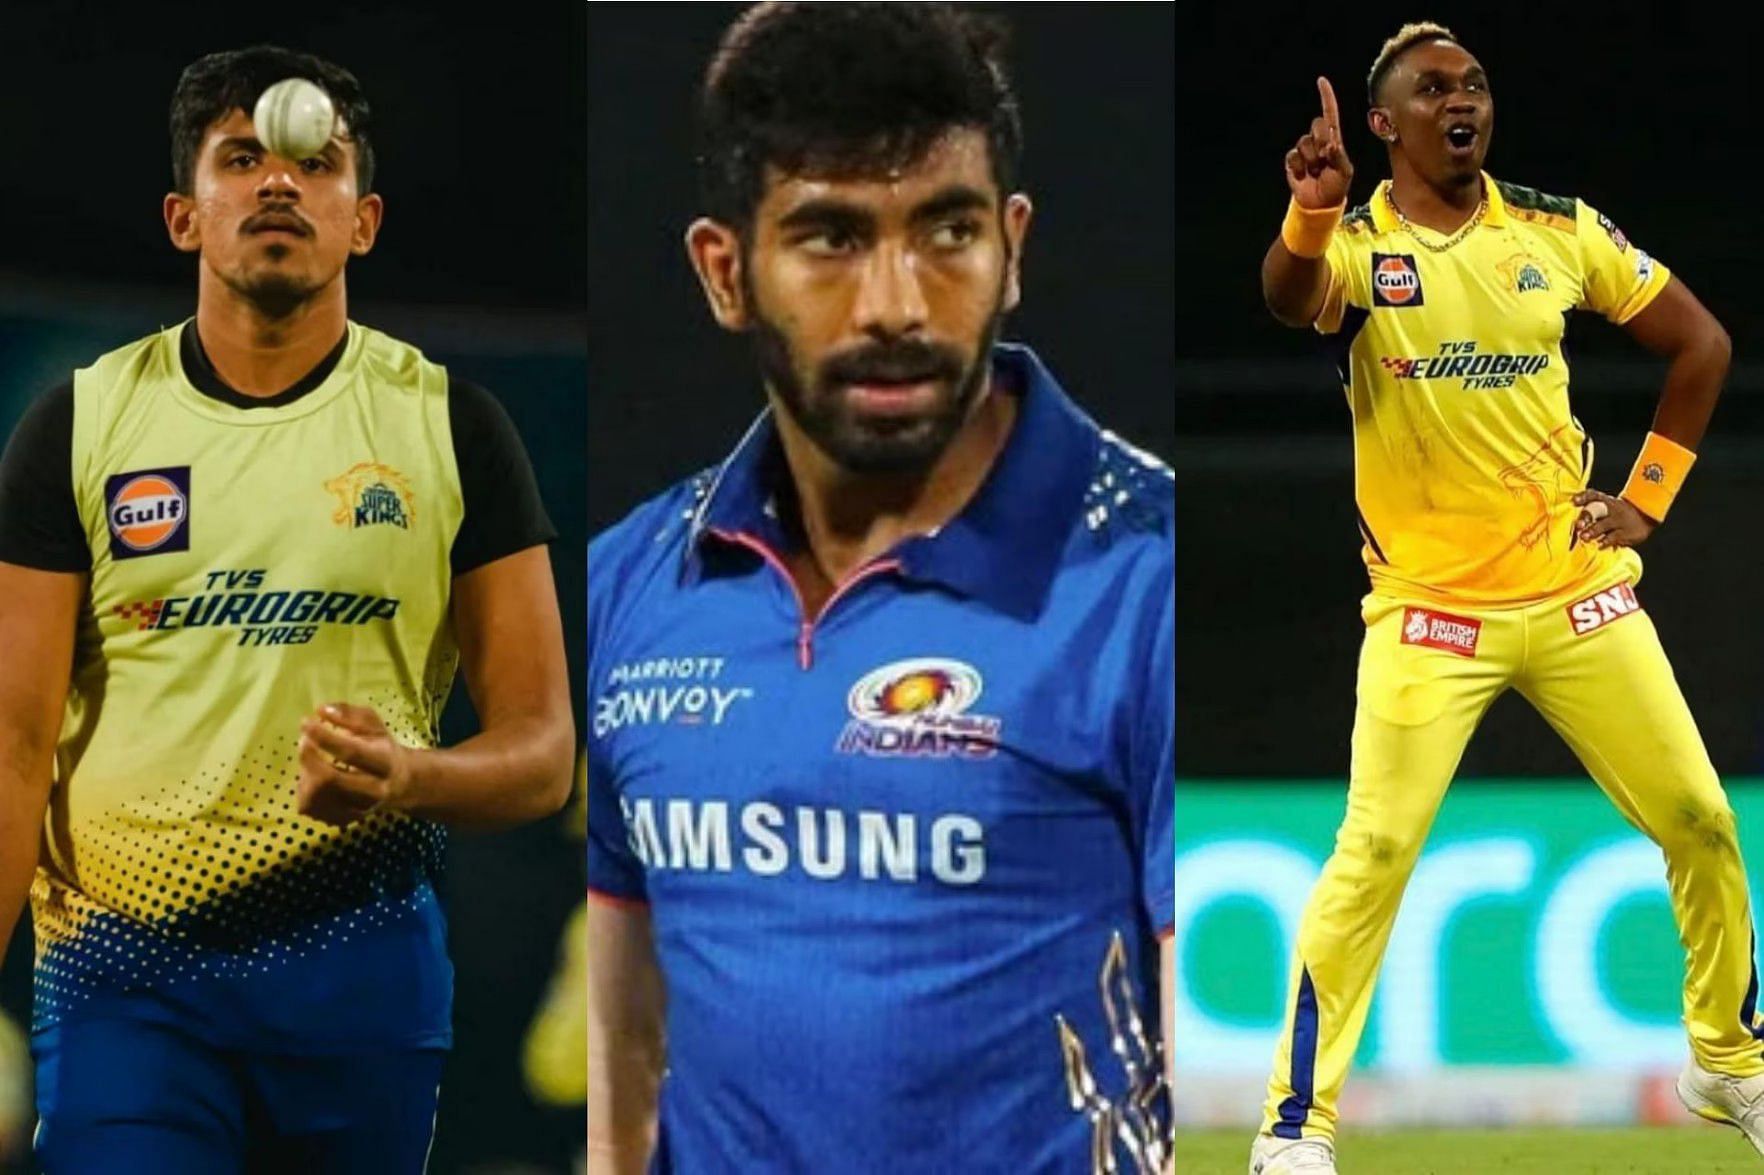 Match 59 of the IPL 2022 will be played between the Chennai Super Kings and the Mumbai Indians